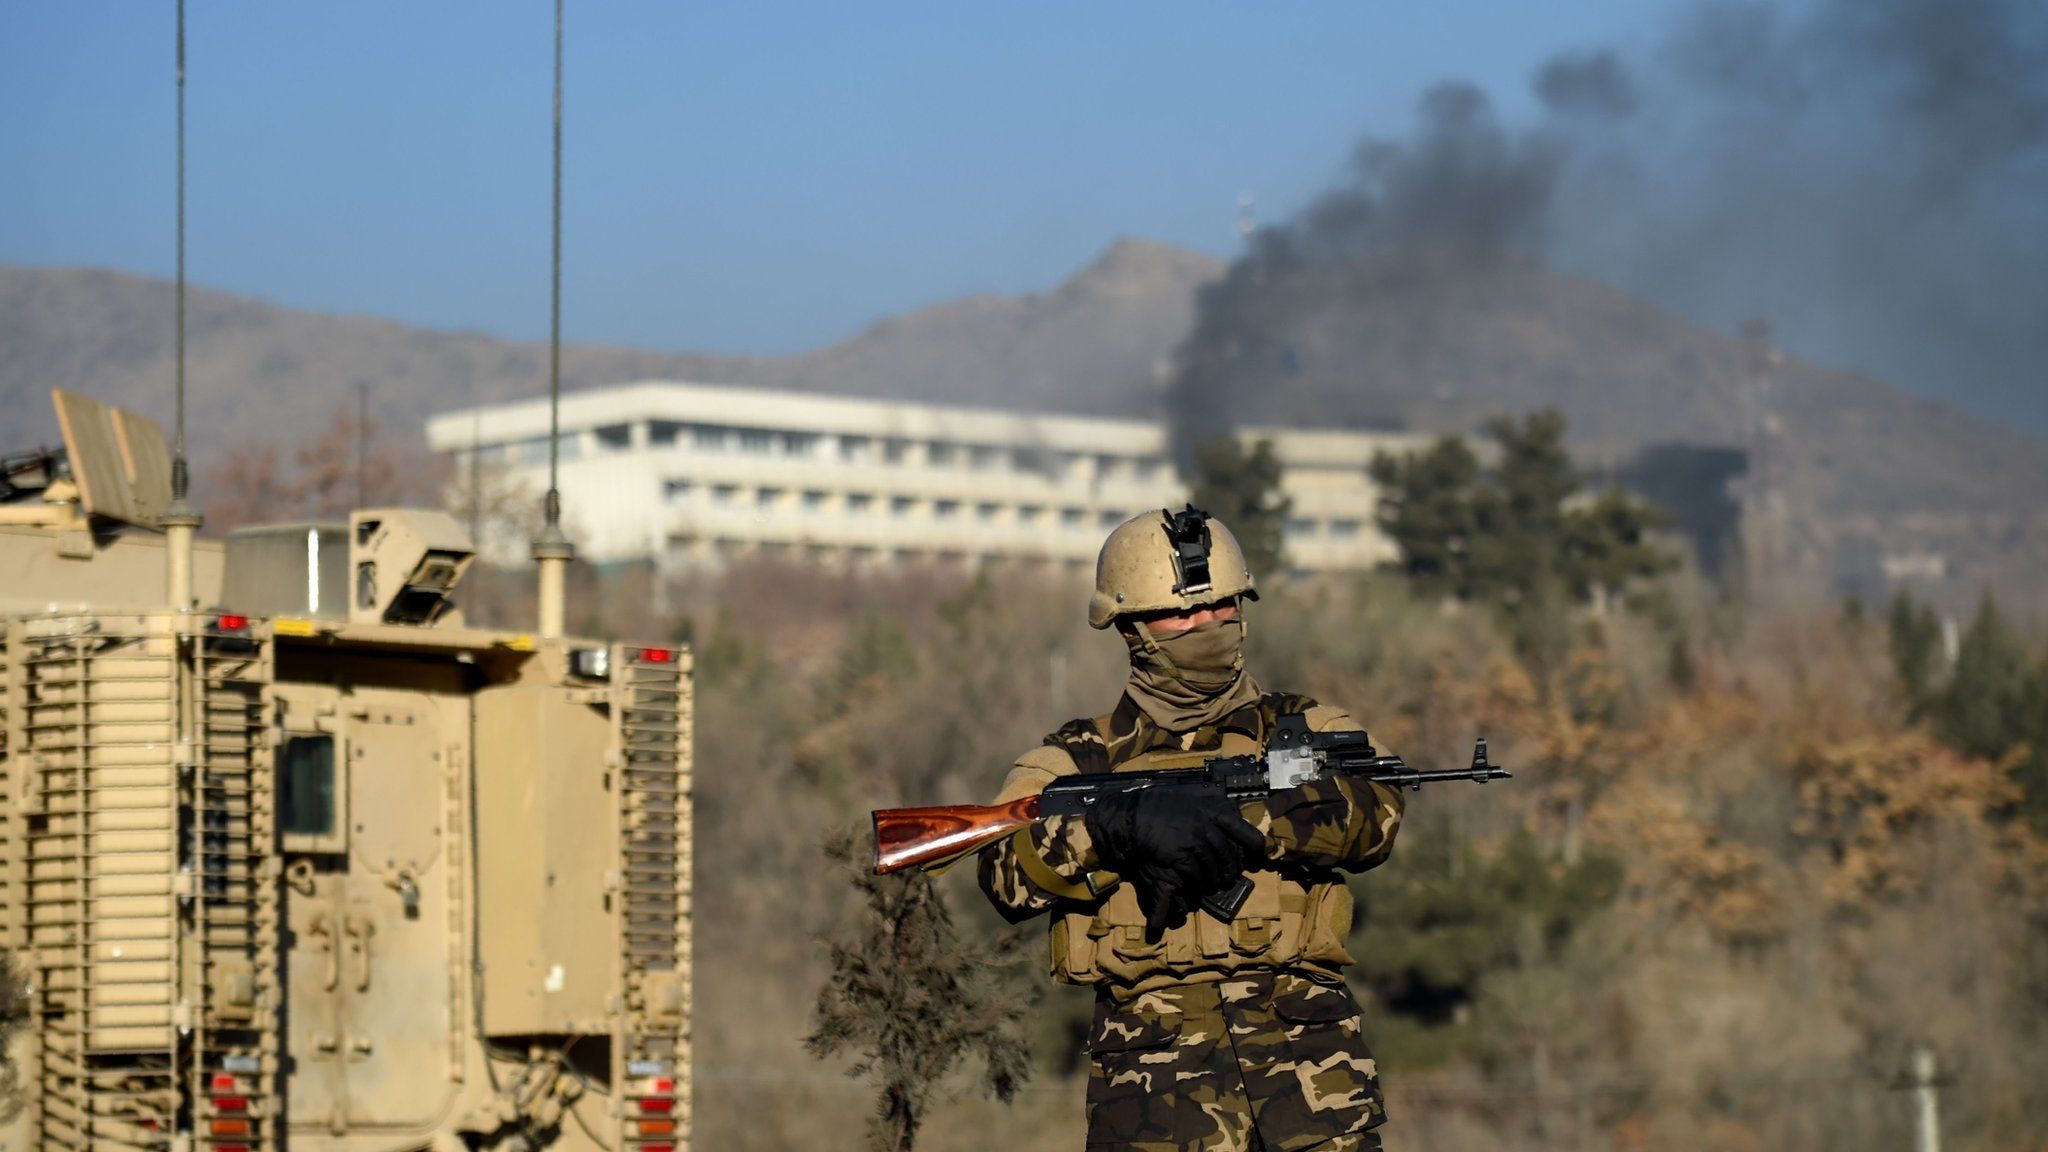 An Afghan soldier near the Intercontinental Hotel during the siege on 21 January.